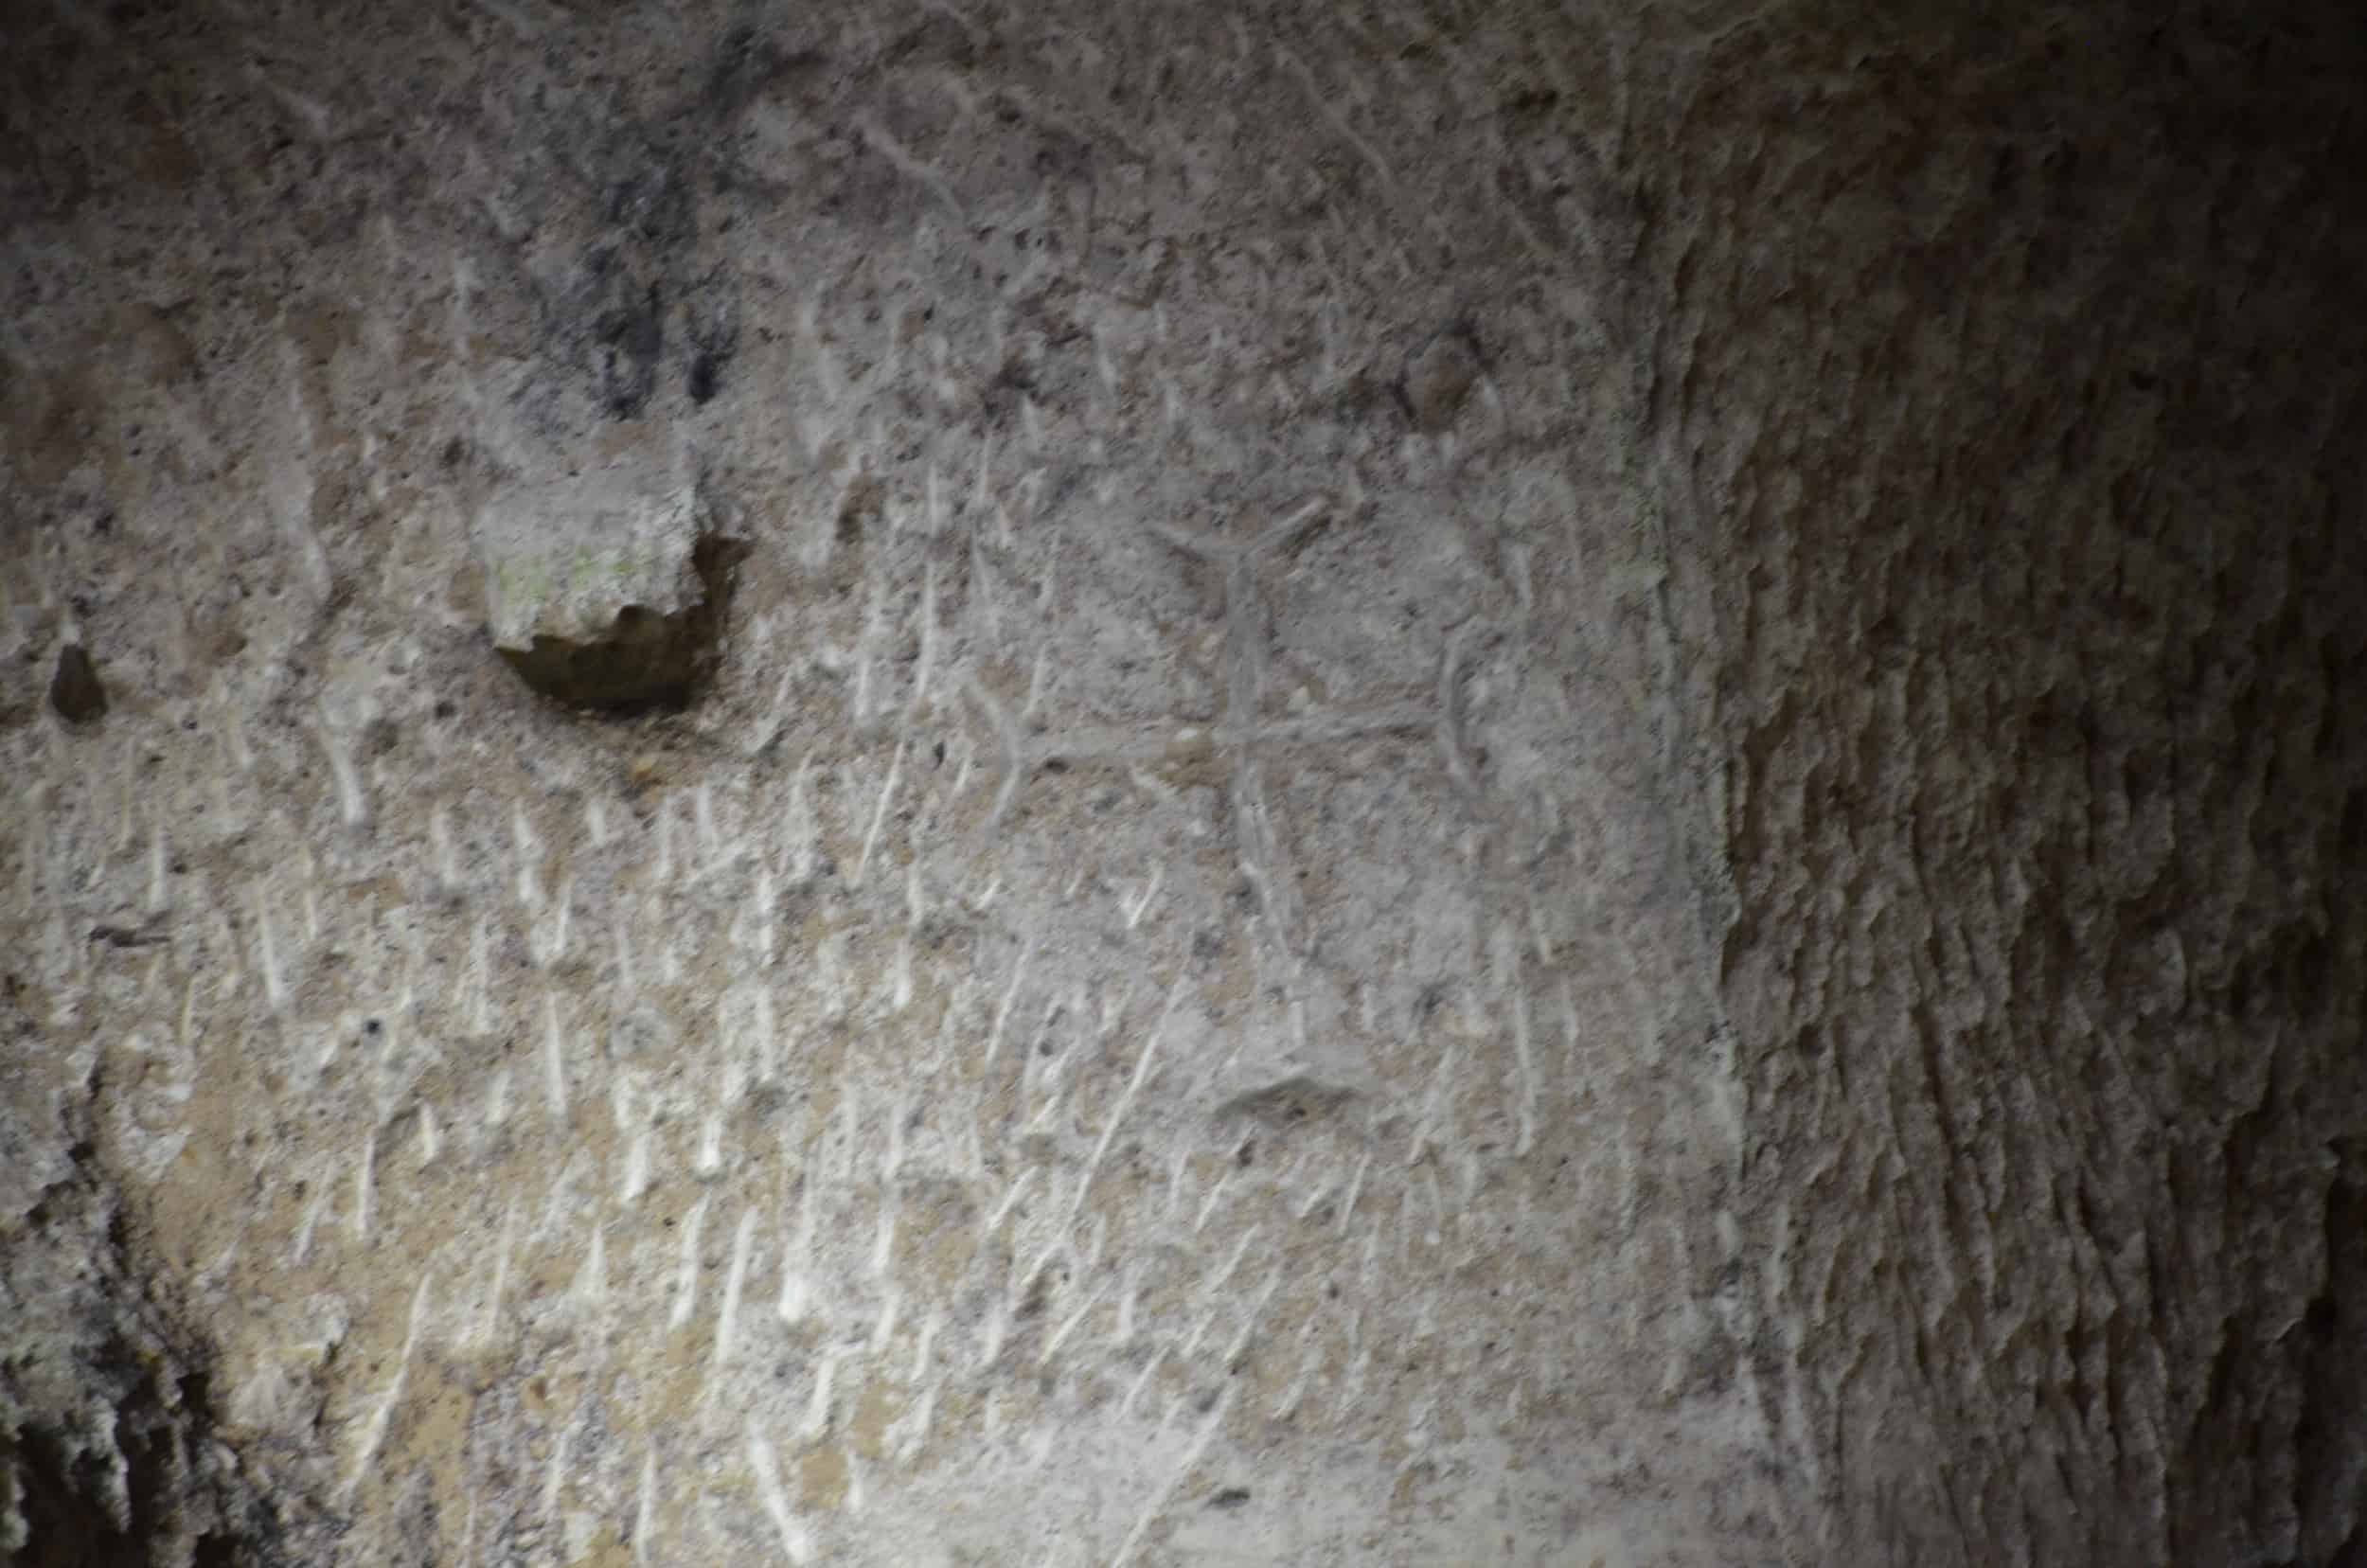 Cross carved into the wall of a cave